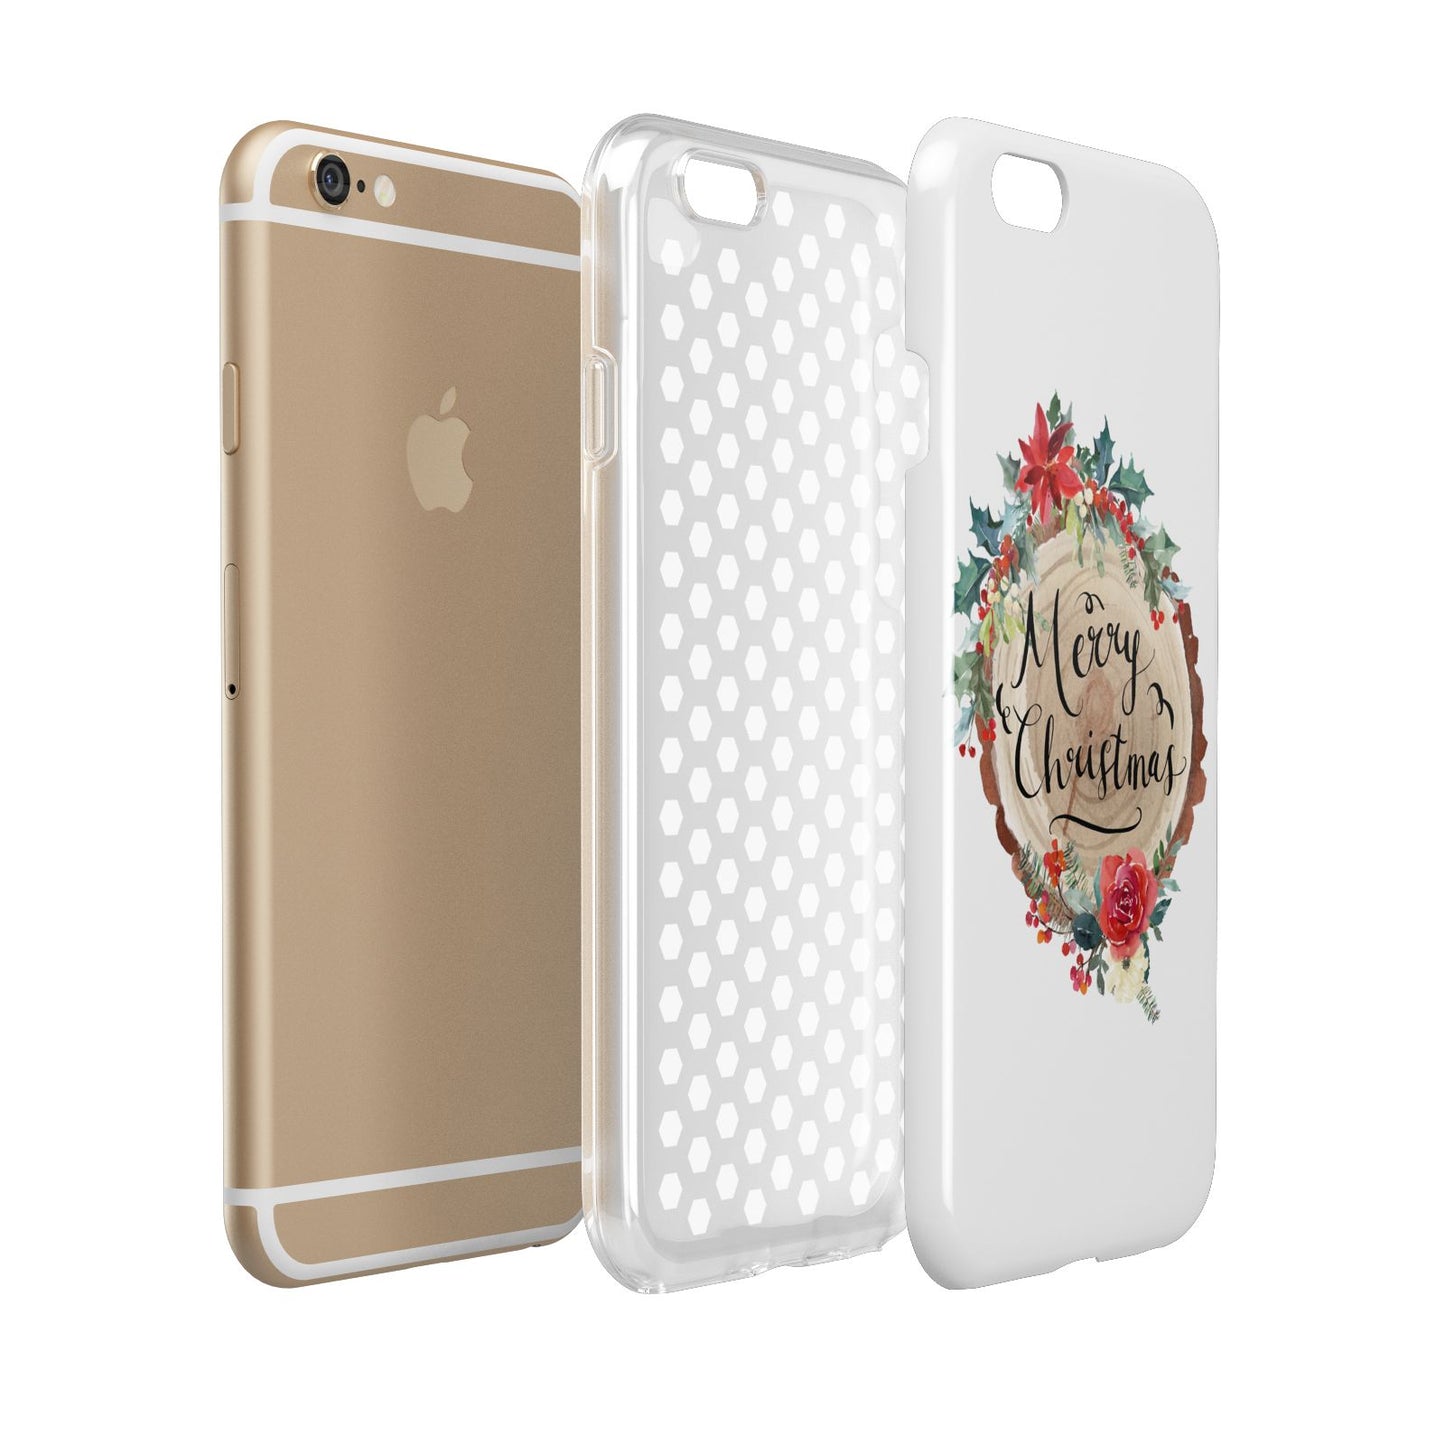 Merry Christmas Log Floral Apple iPhone 6 3D Tough Case Expanded view